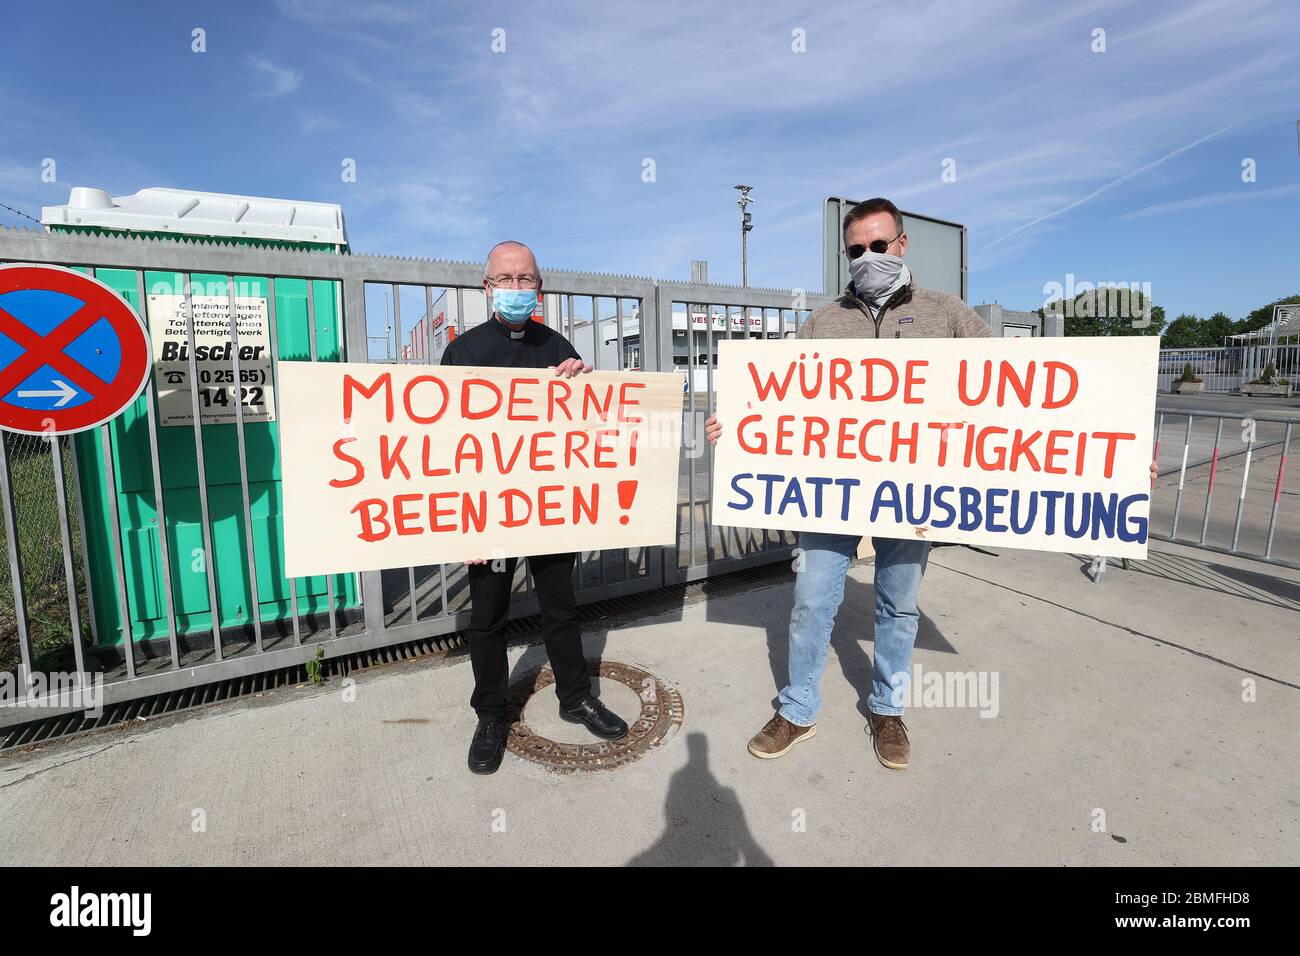 firo: 09.05.2020 General Corona Virus Kreis Coesfeld, Westfleisch, extension of the Corona restrictions Protest by two opponents of modern worker slavery before the closed factory in Coesfeld left: Private Peter Kossen and right with Dominik Blum (right) with posters 'Dignity and justice instead of exploitation' in front of the Westfleisch factory gate in Coesfeld They protest against unfair working conditions in the meat industry. He has been a pastor of the Seliger Niels Stensen parish in Lengerich since 2017. In 2018, he founded an association called 'Action Dignity and Justice' to help Bul Stock Photo